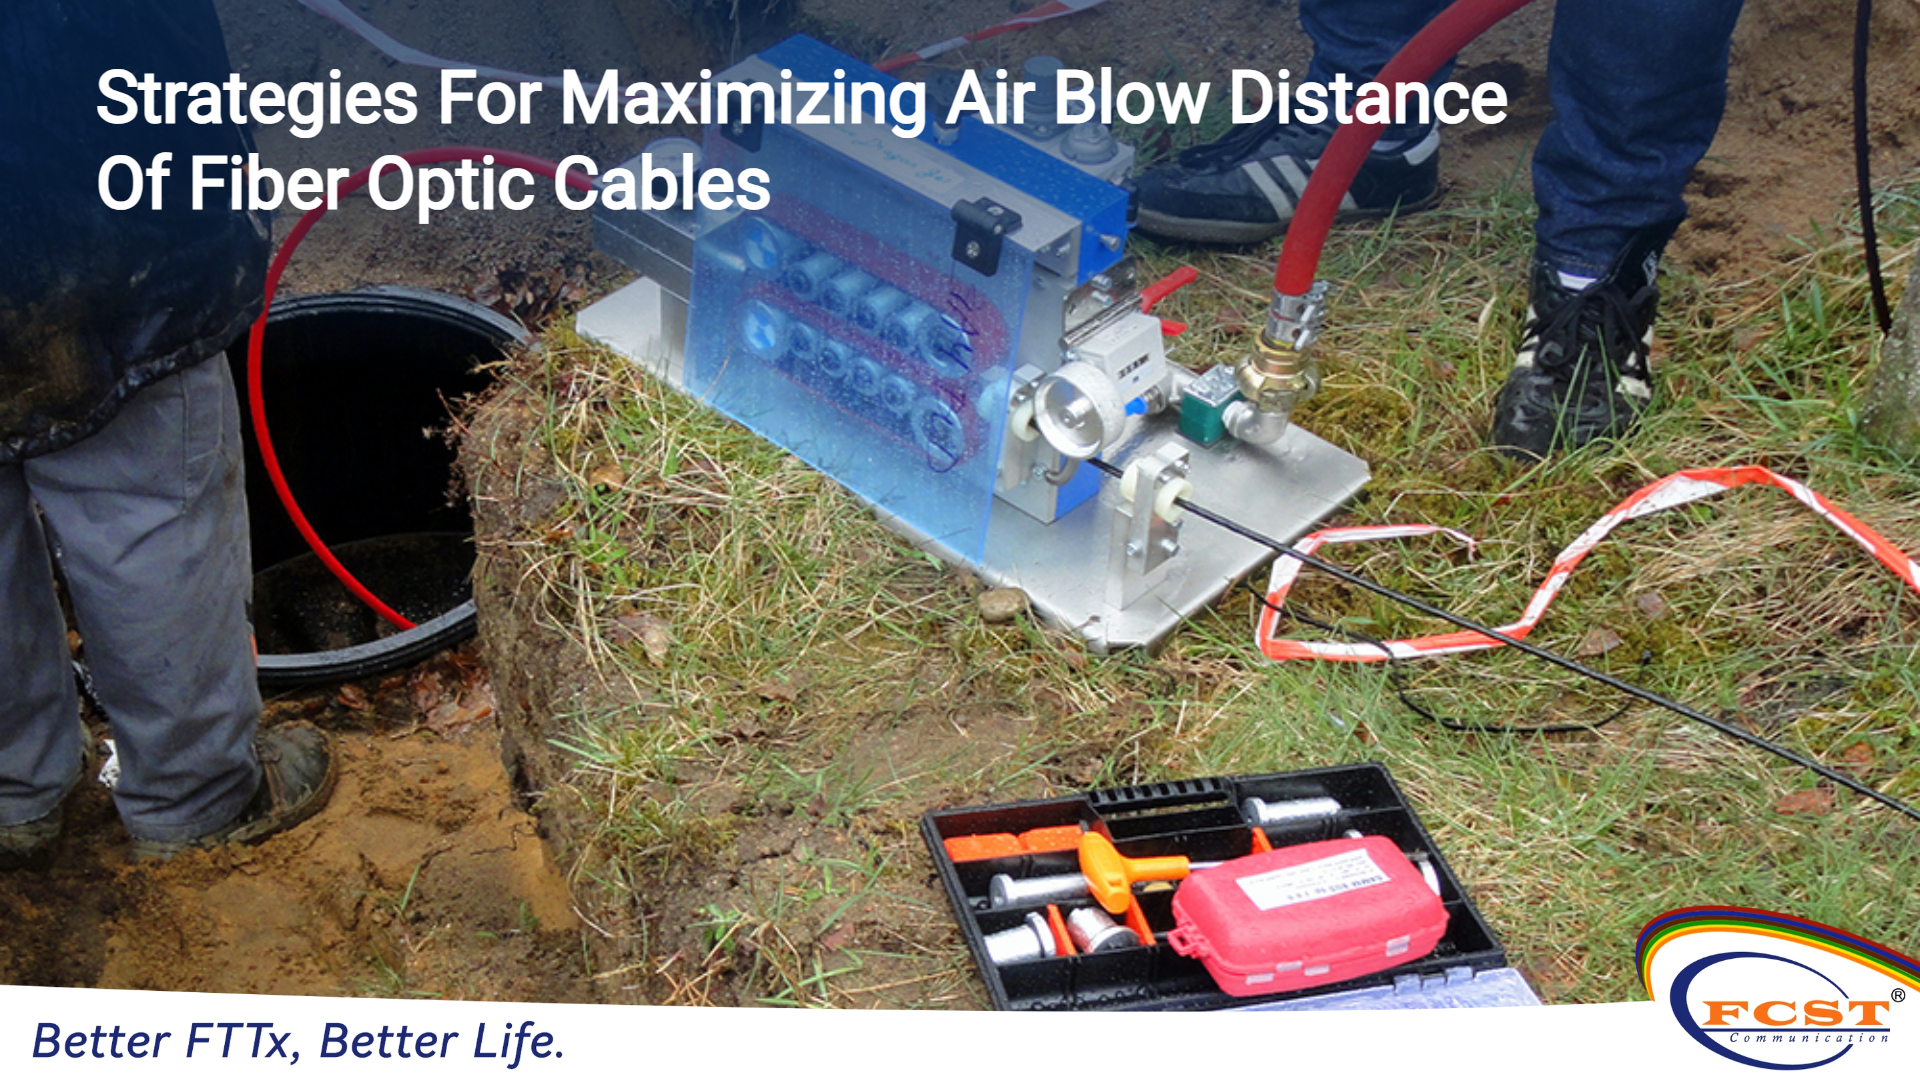 Strategies For Maximizing Air Blow Distance Of Fiber Optic Cables